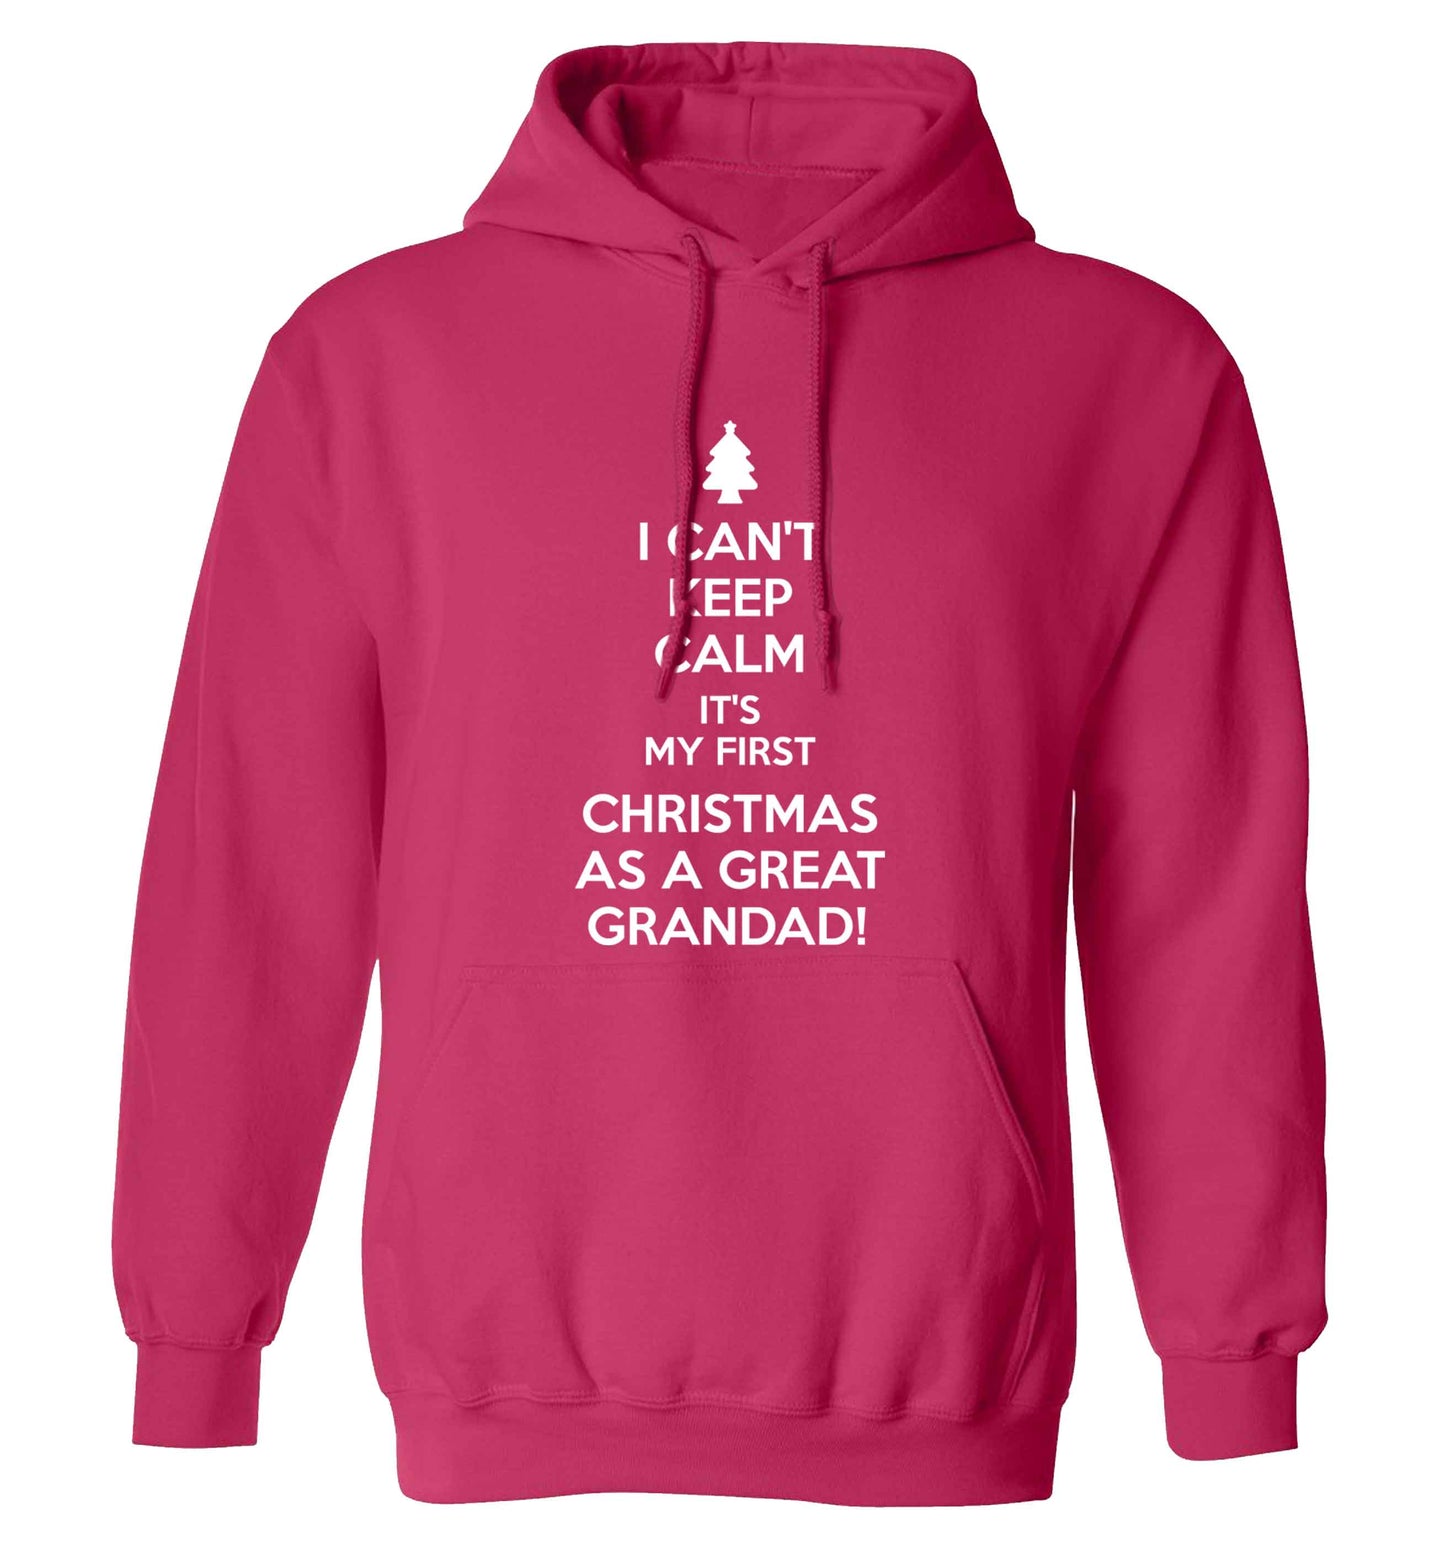 I can't keep calm it's my first Christmas as a great grandad! adults unisex pink hoodie 2XL